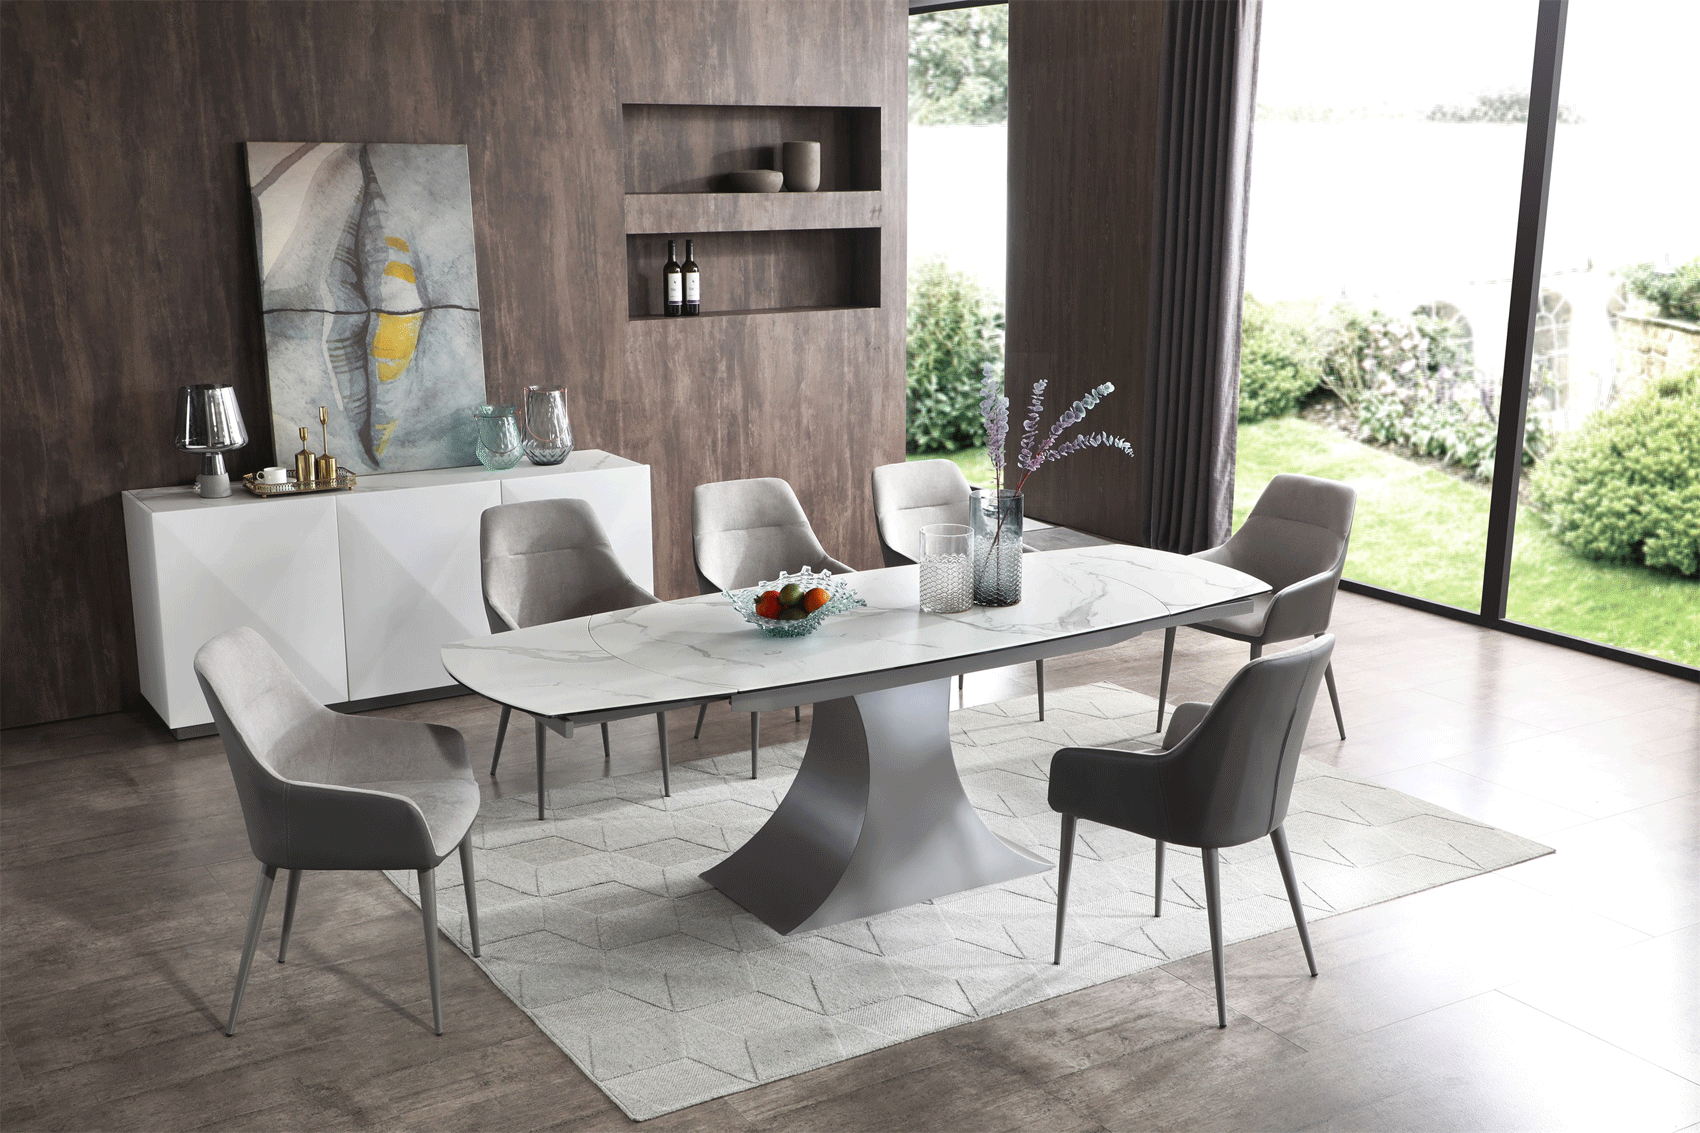 Brands Unico Tables and Chairs, Italy 9035 Table with 1254 Chairs and 3012 buffet